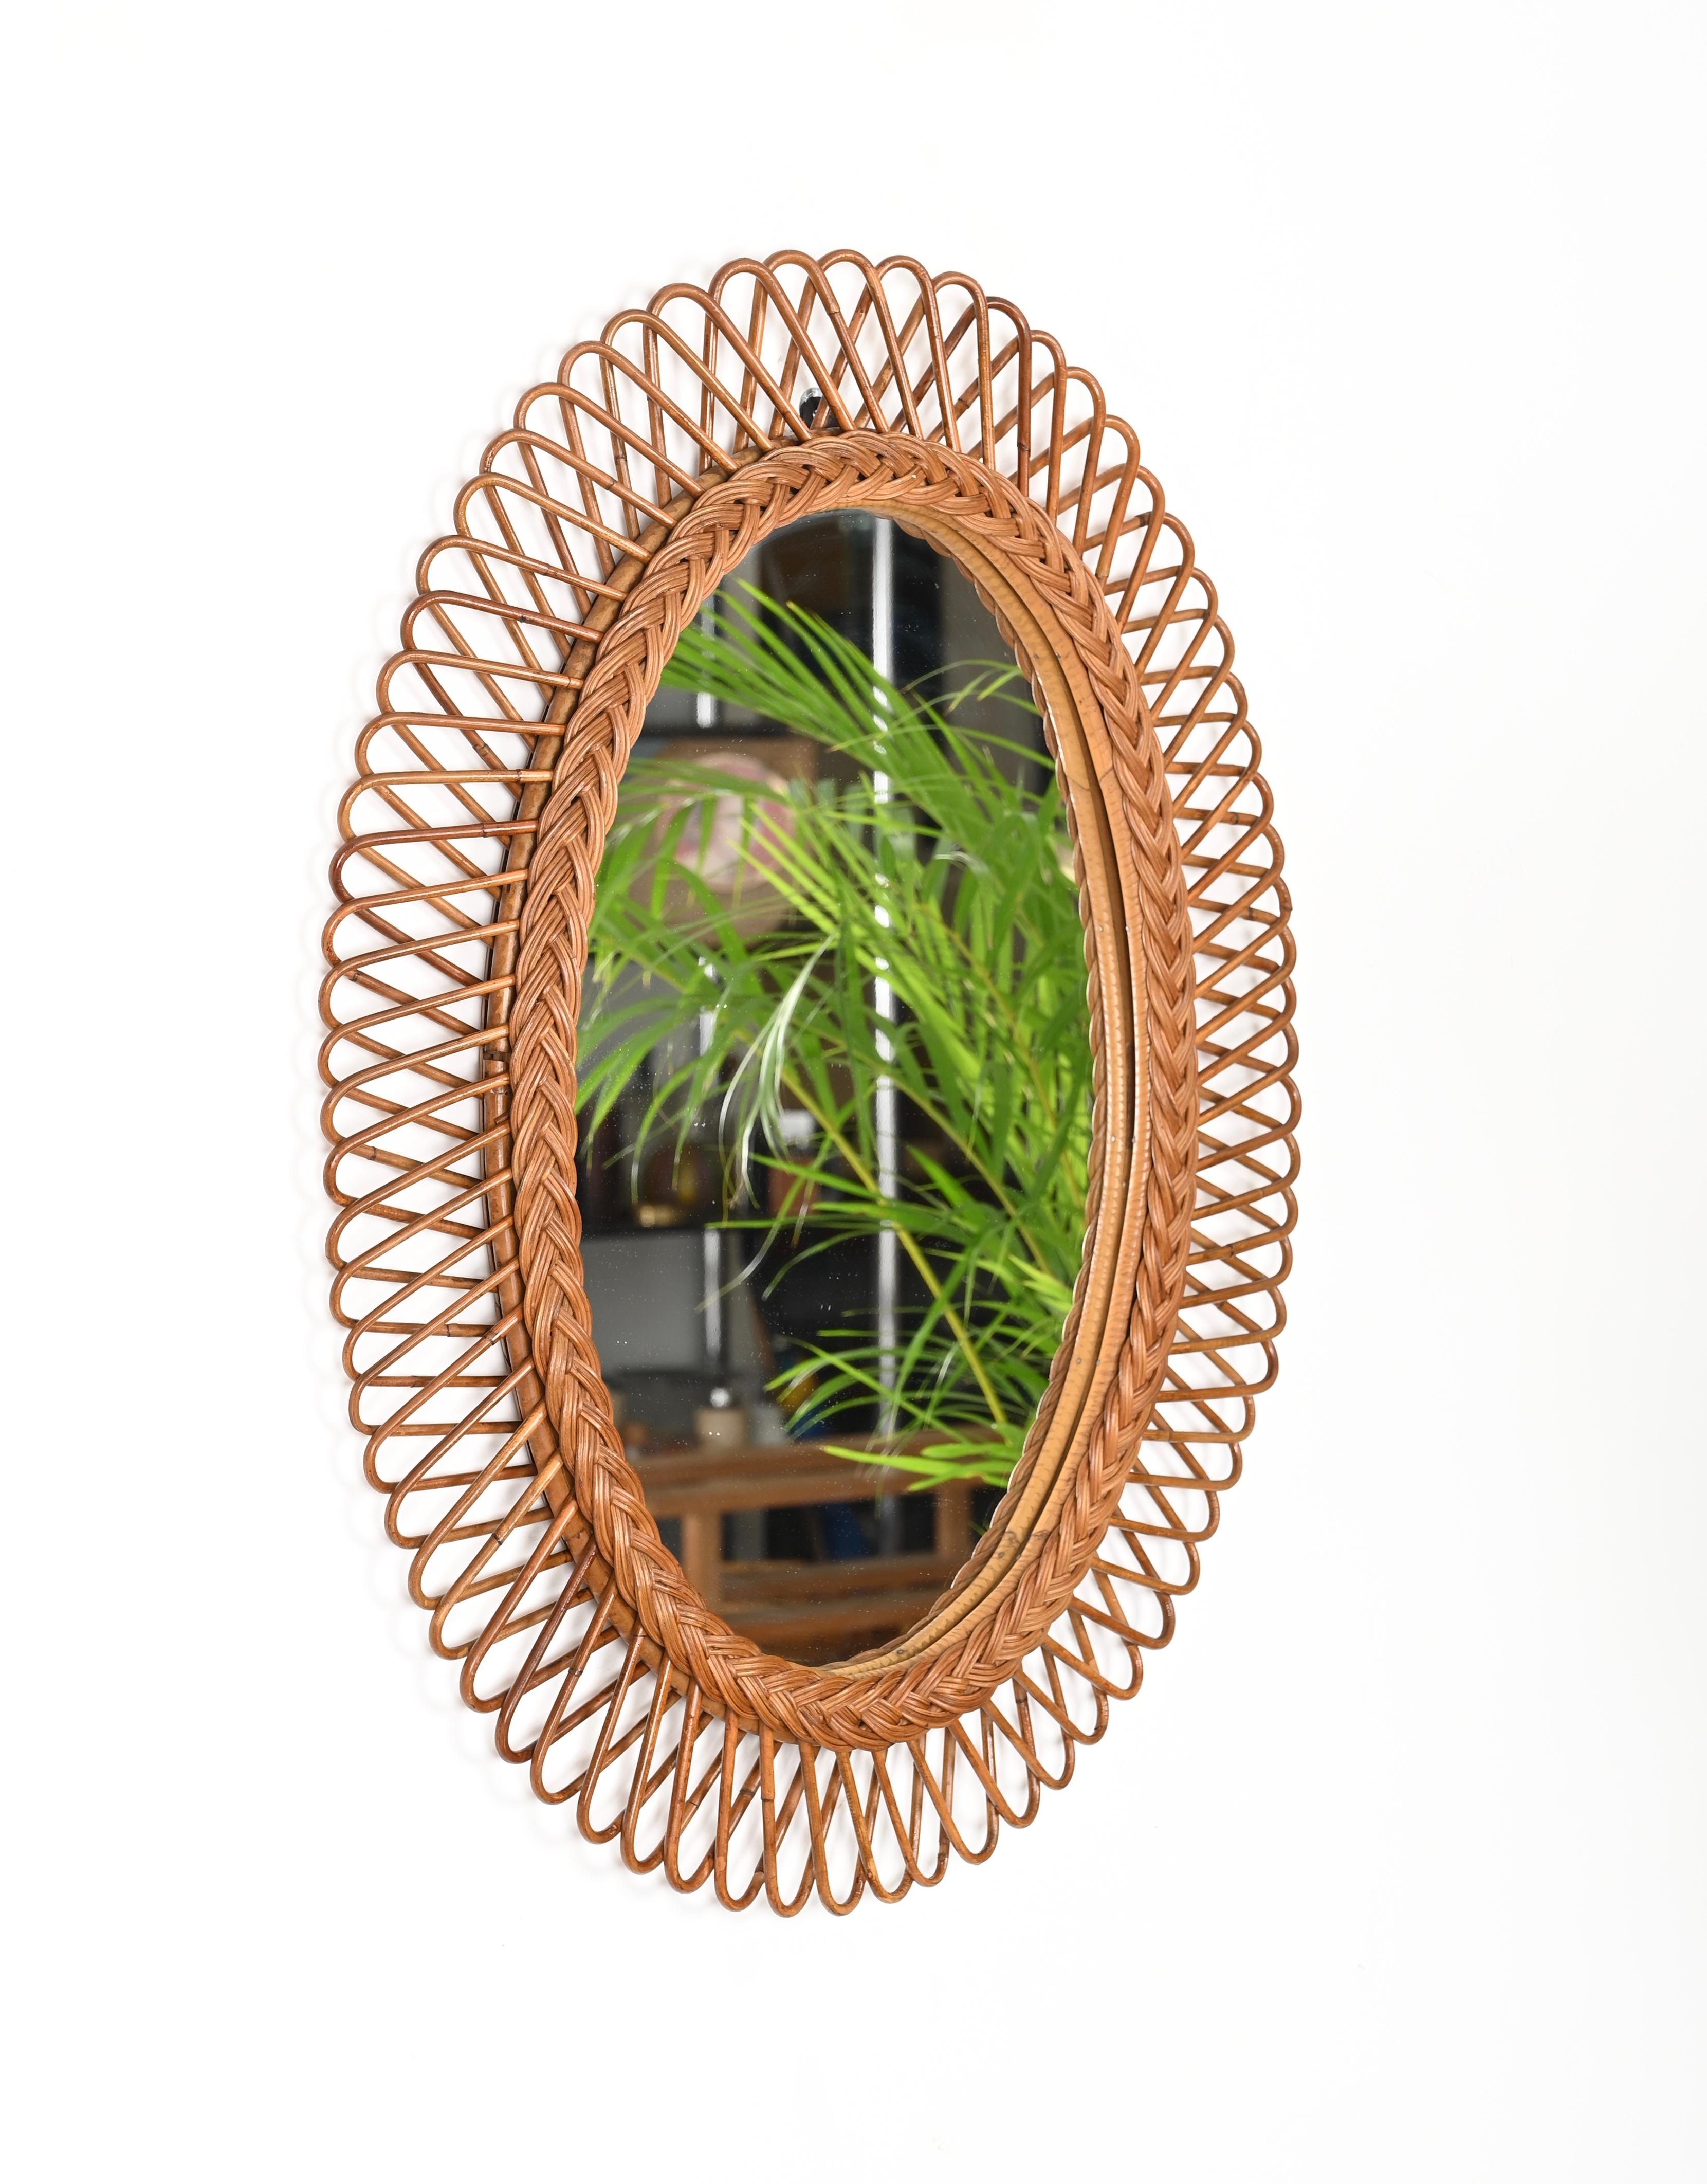 Franco Albini Midcentury  Bamboo, Rattan and Wicker Oval Mirror,  Italy 1970s For Sale 1